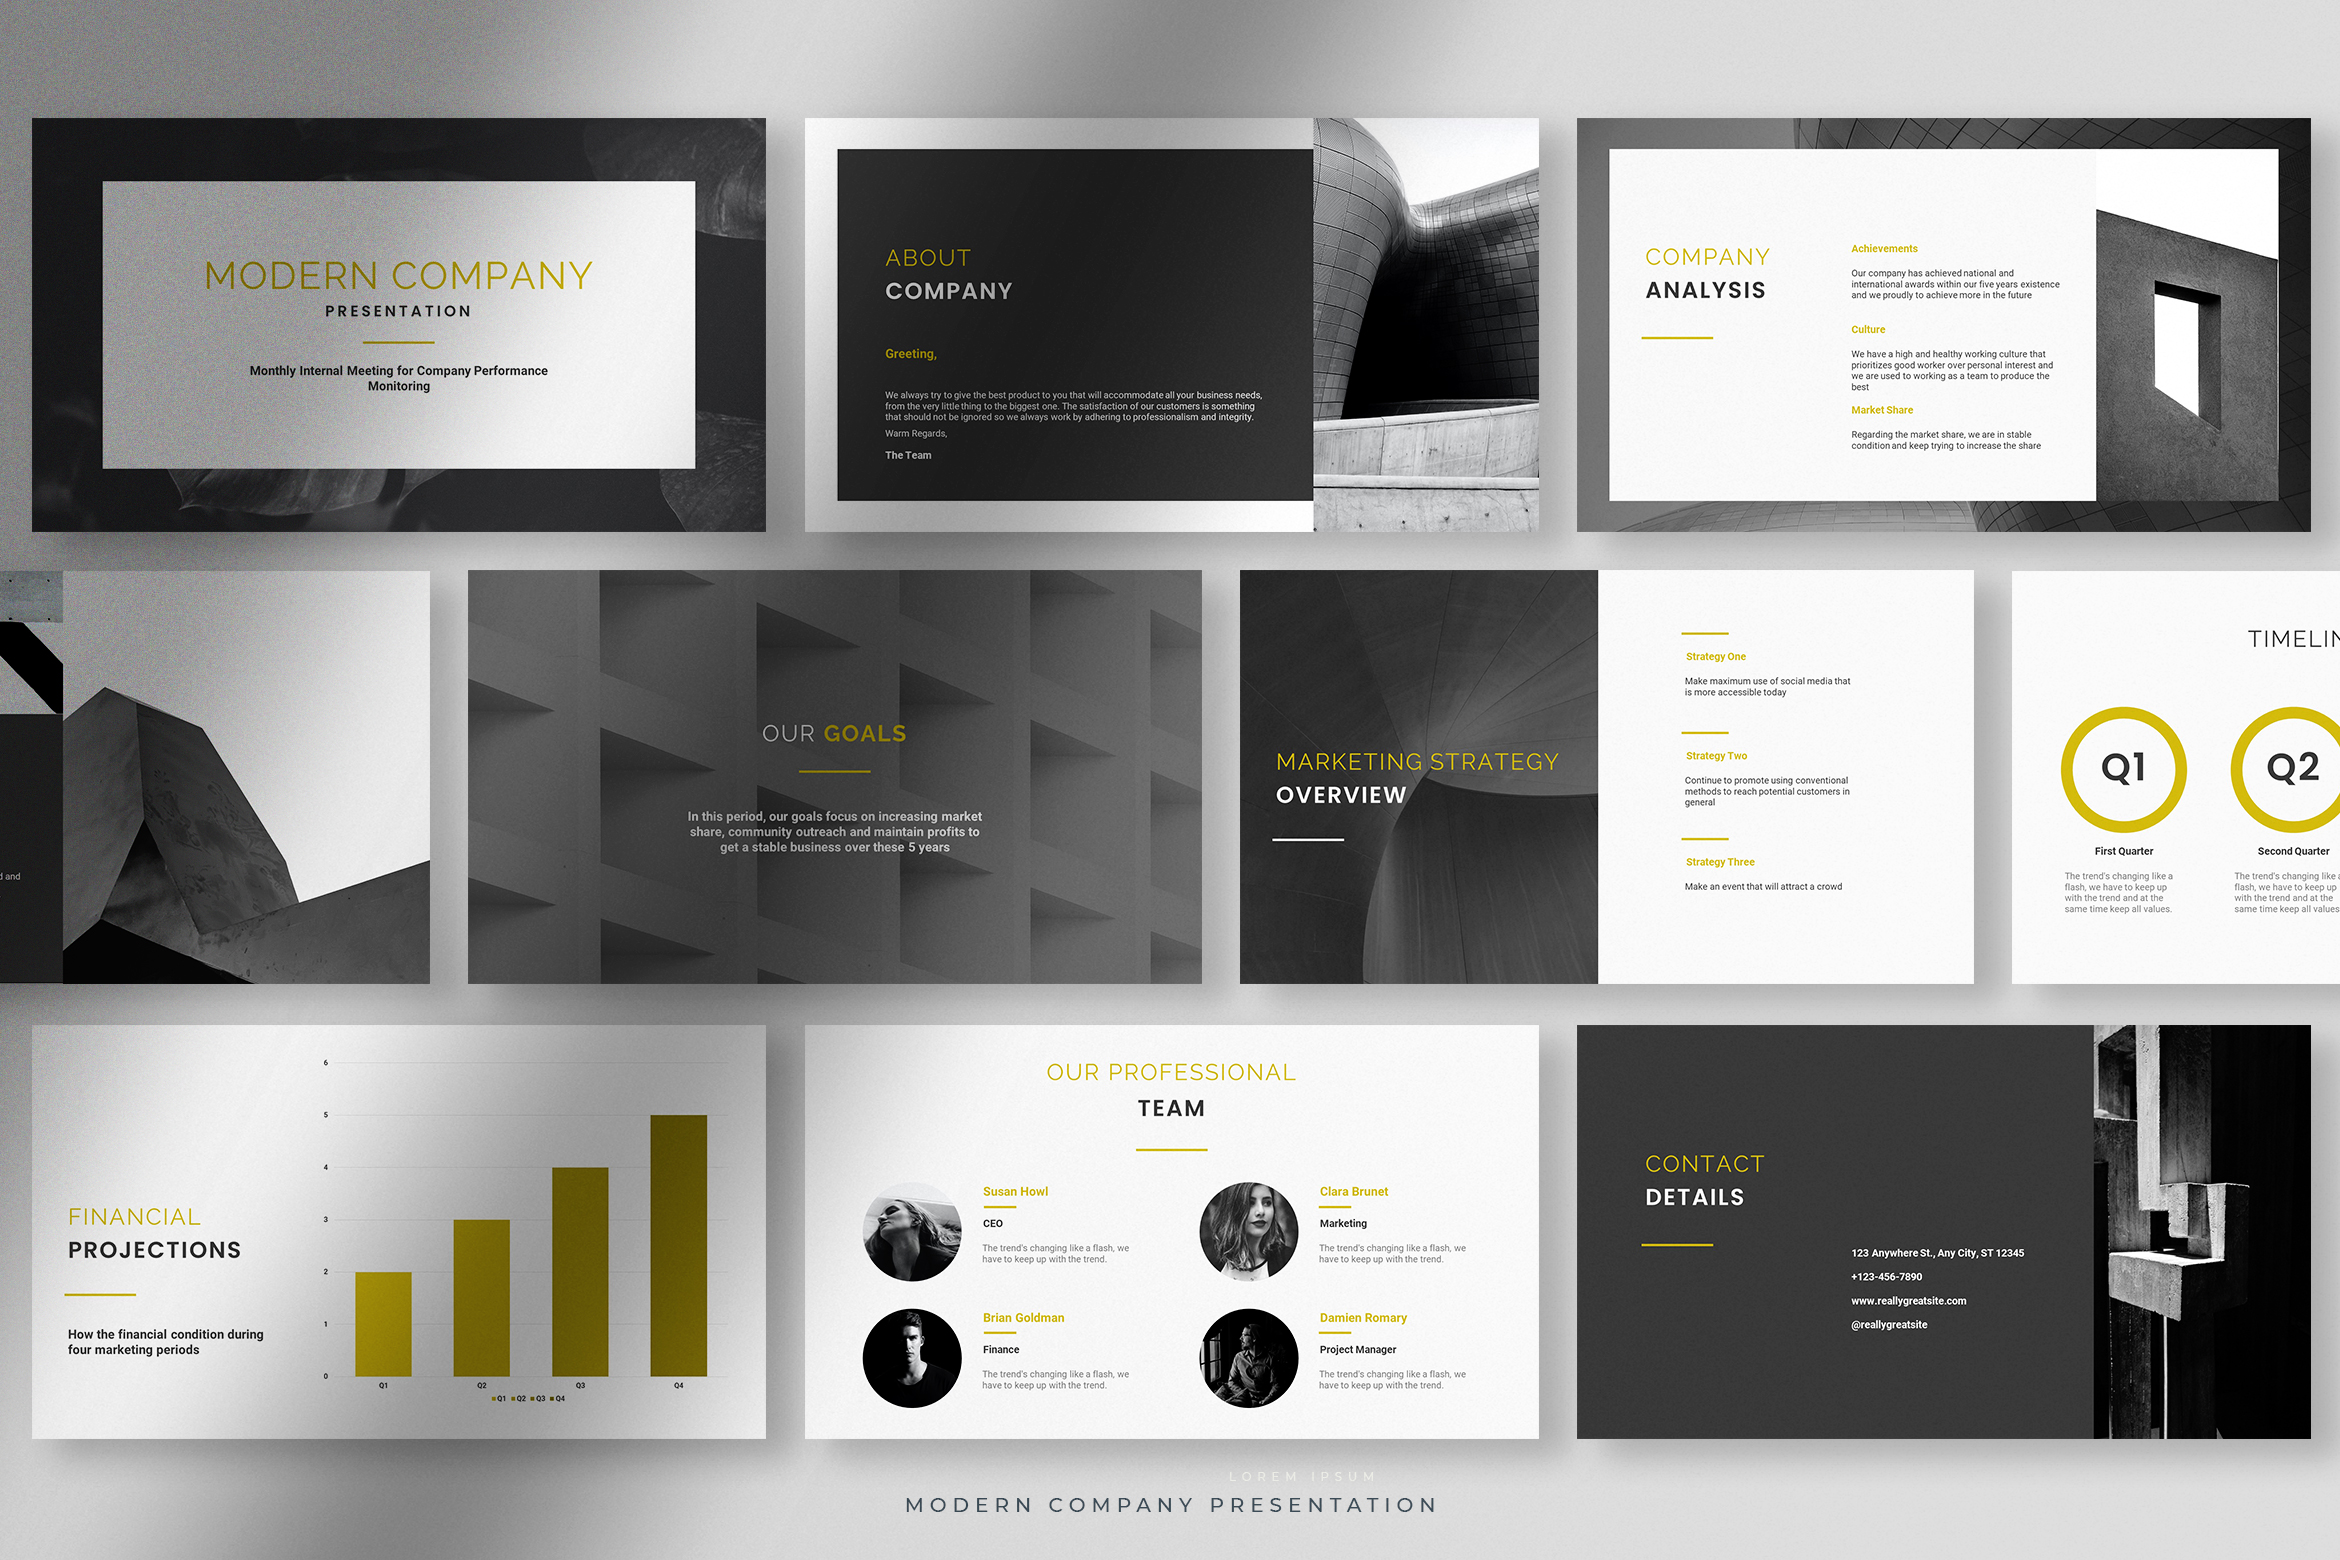 view the presentation in grayscale